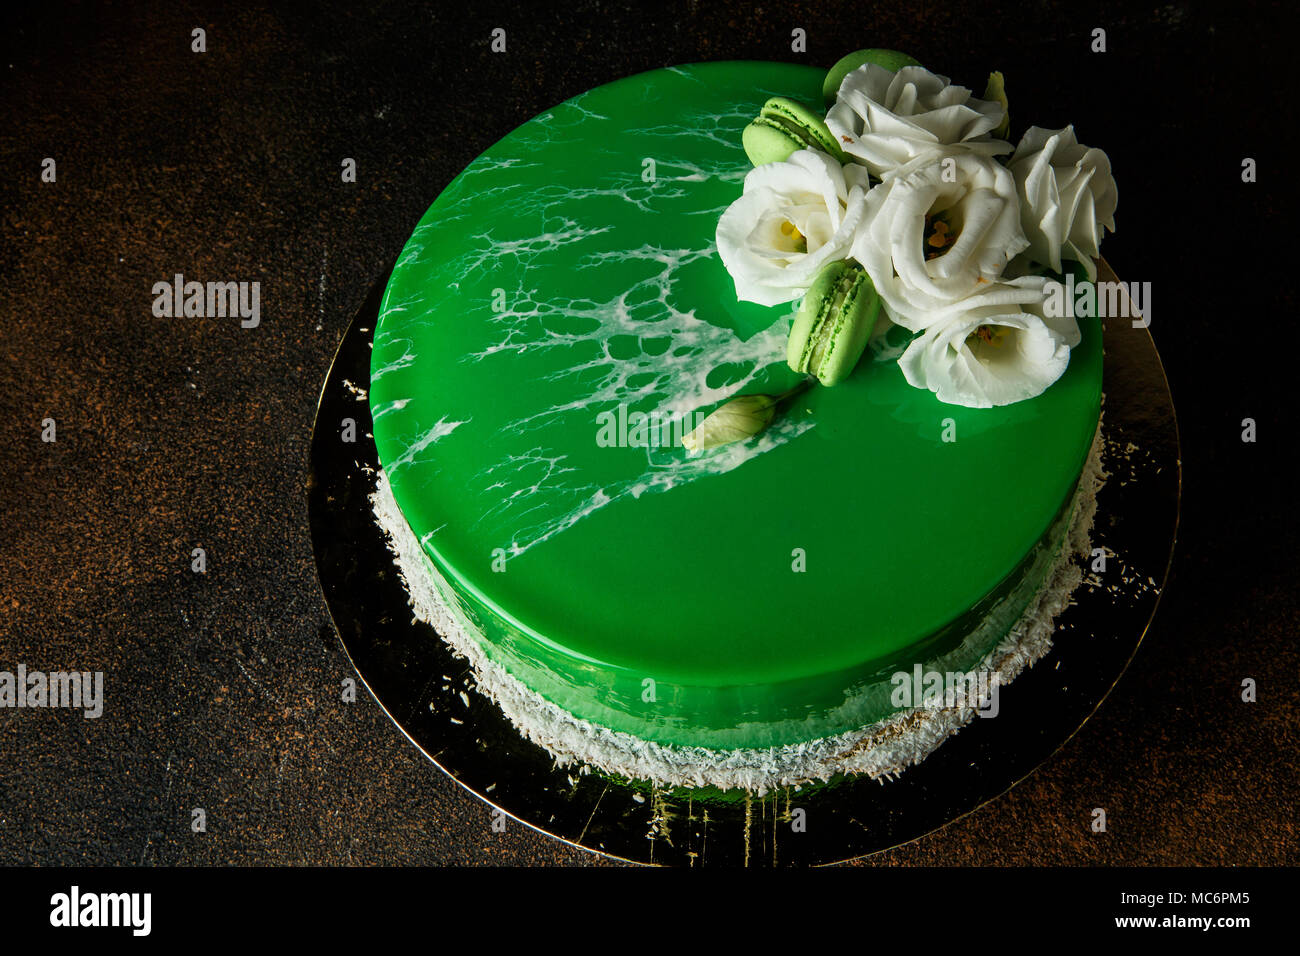 top view of homemade mousse cake decorated with green mirror glaze, white roses, coconut chips and macaroons Stock Photo